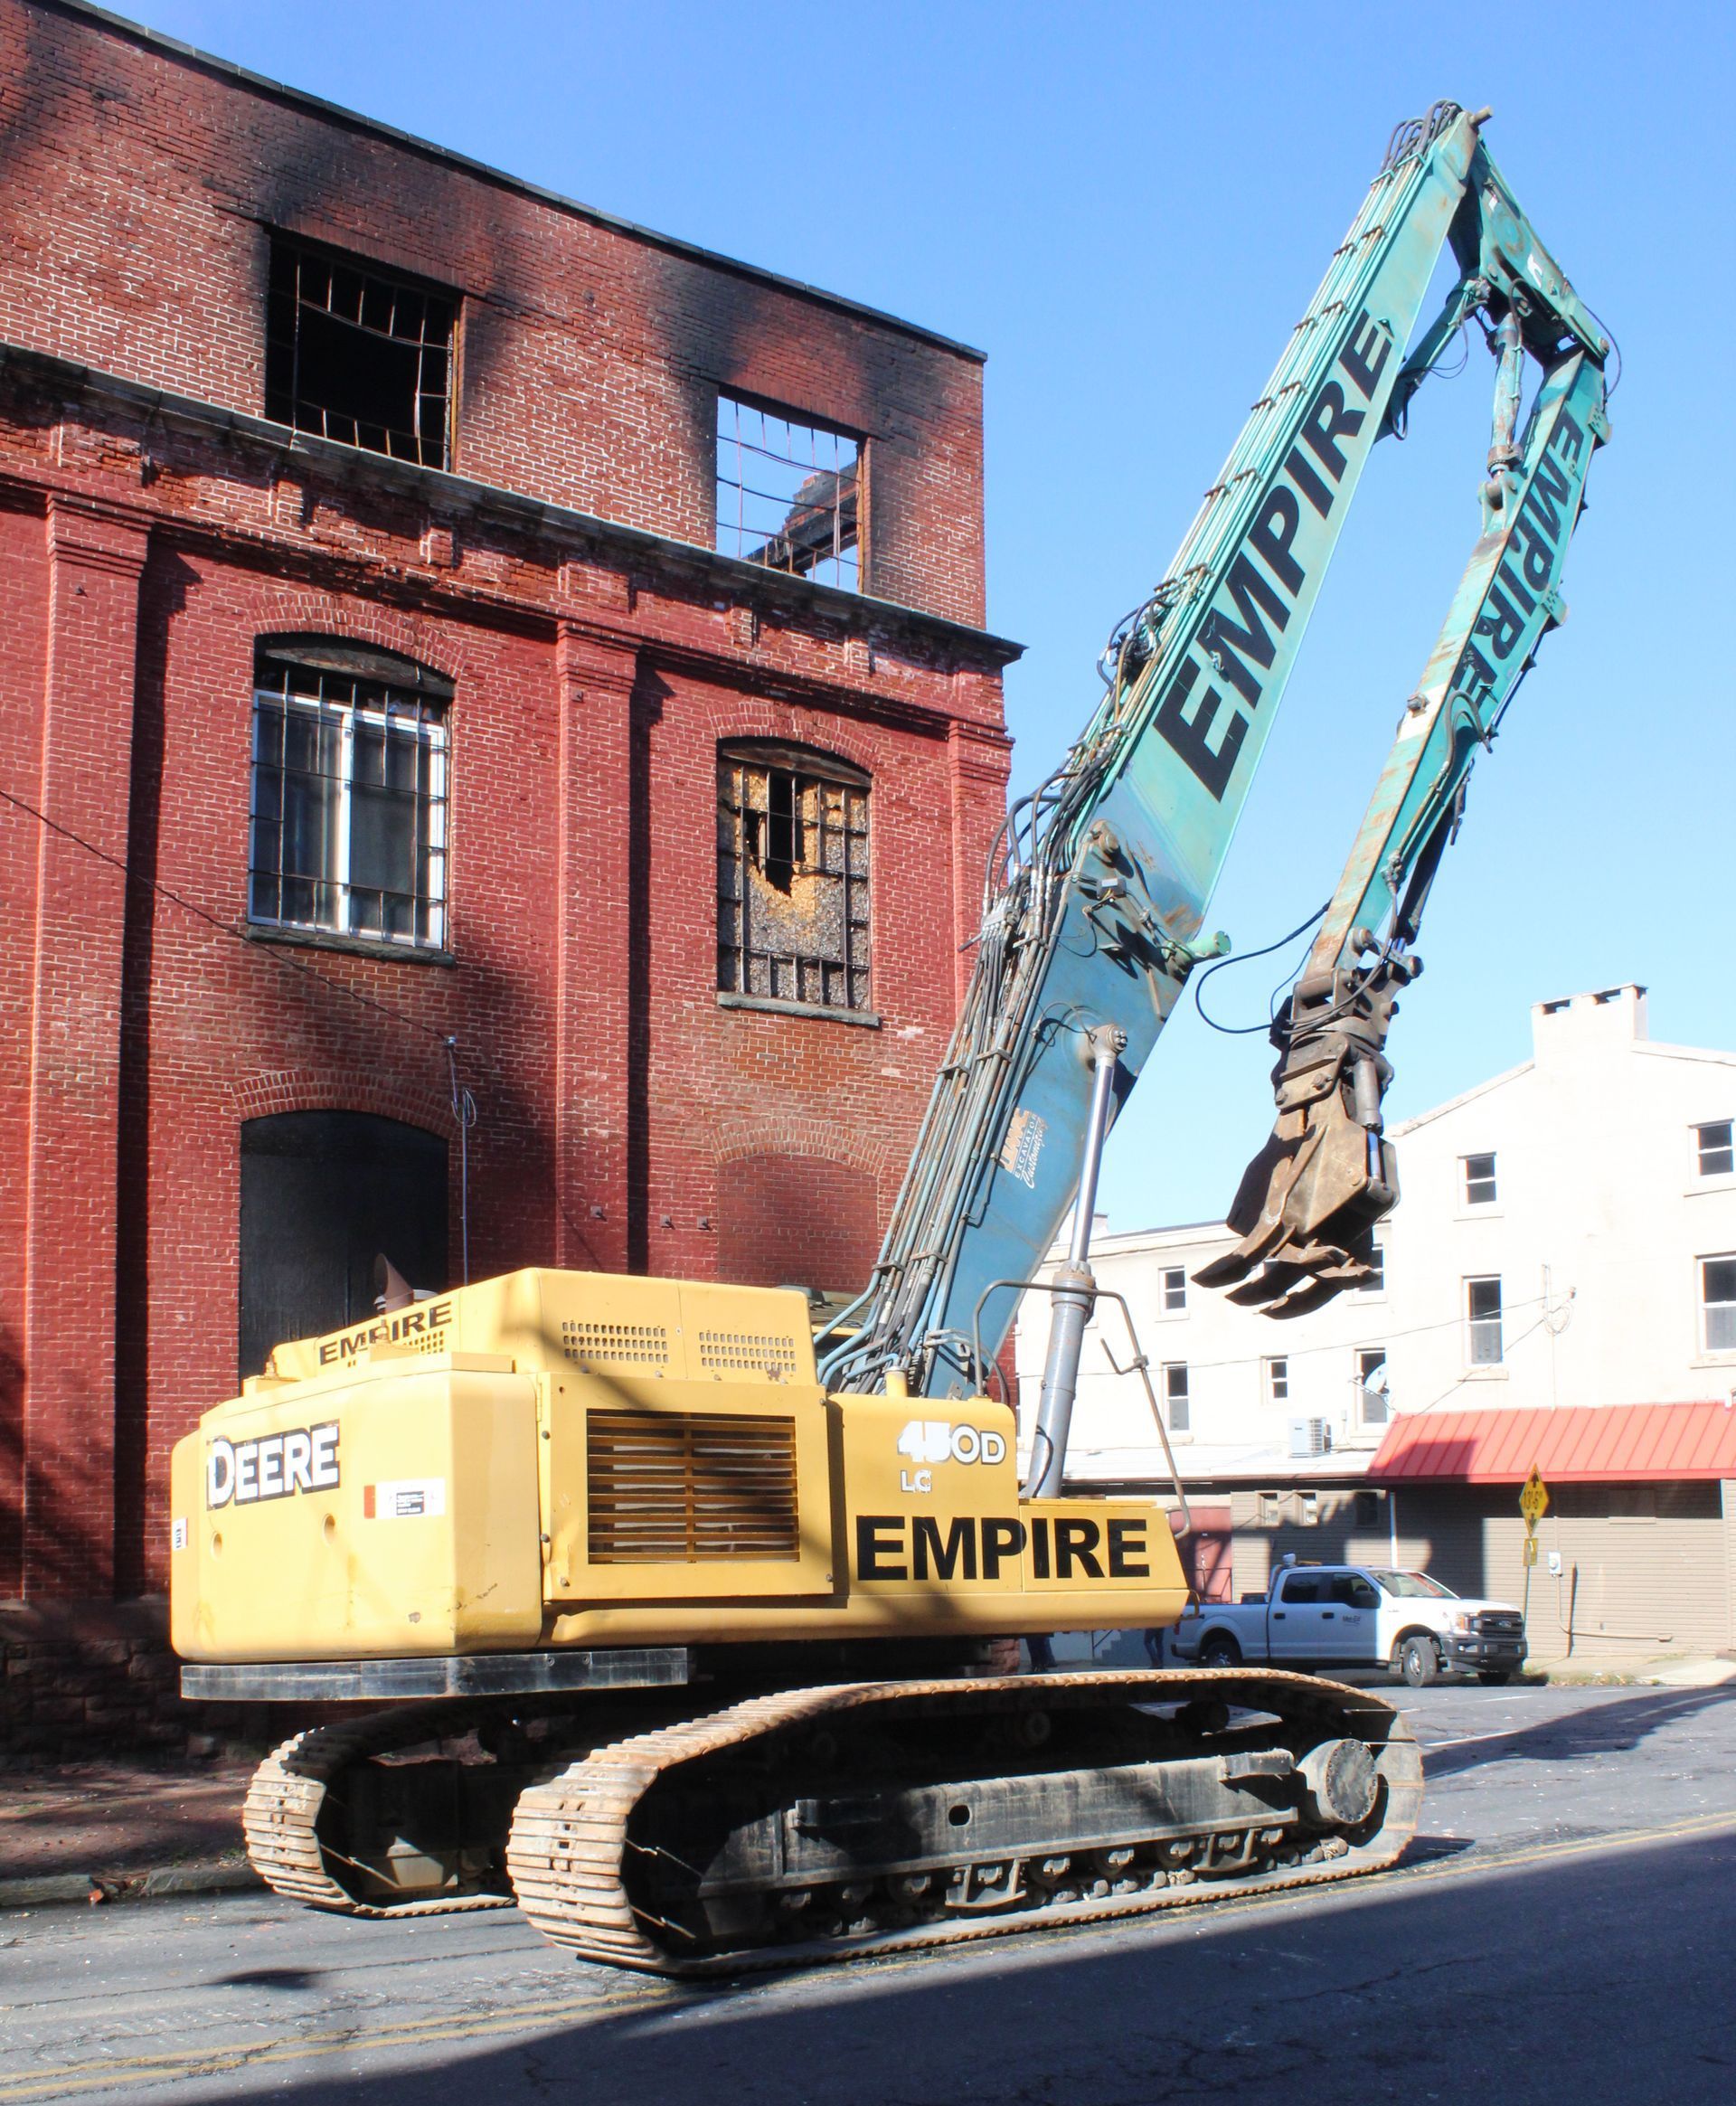 An empire excavator is parked in front of a brick building